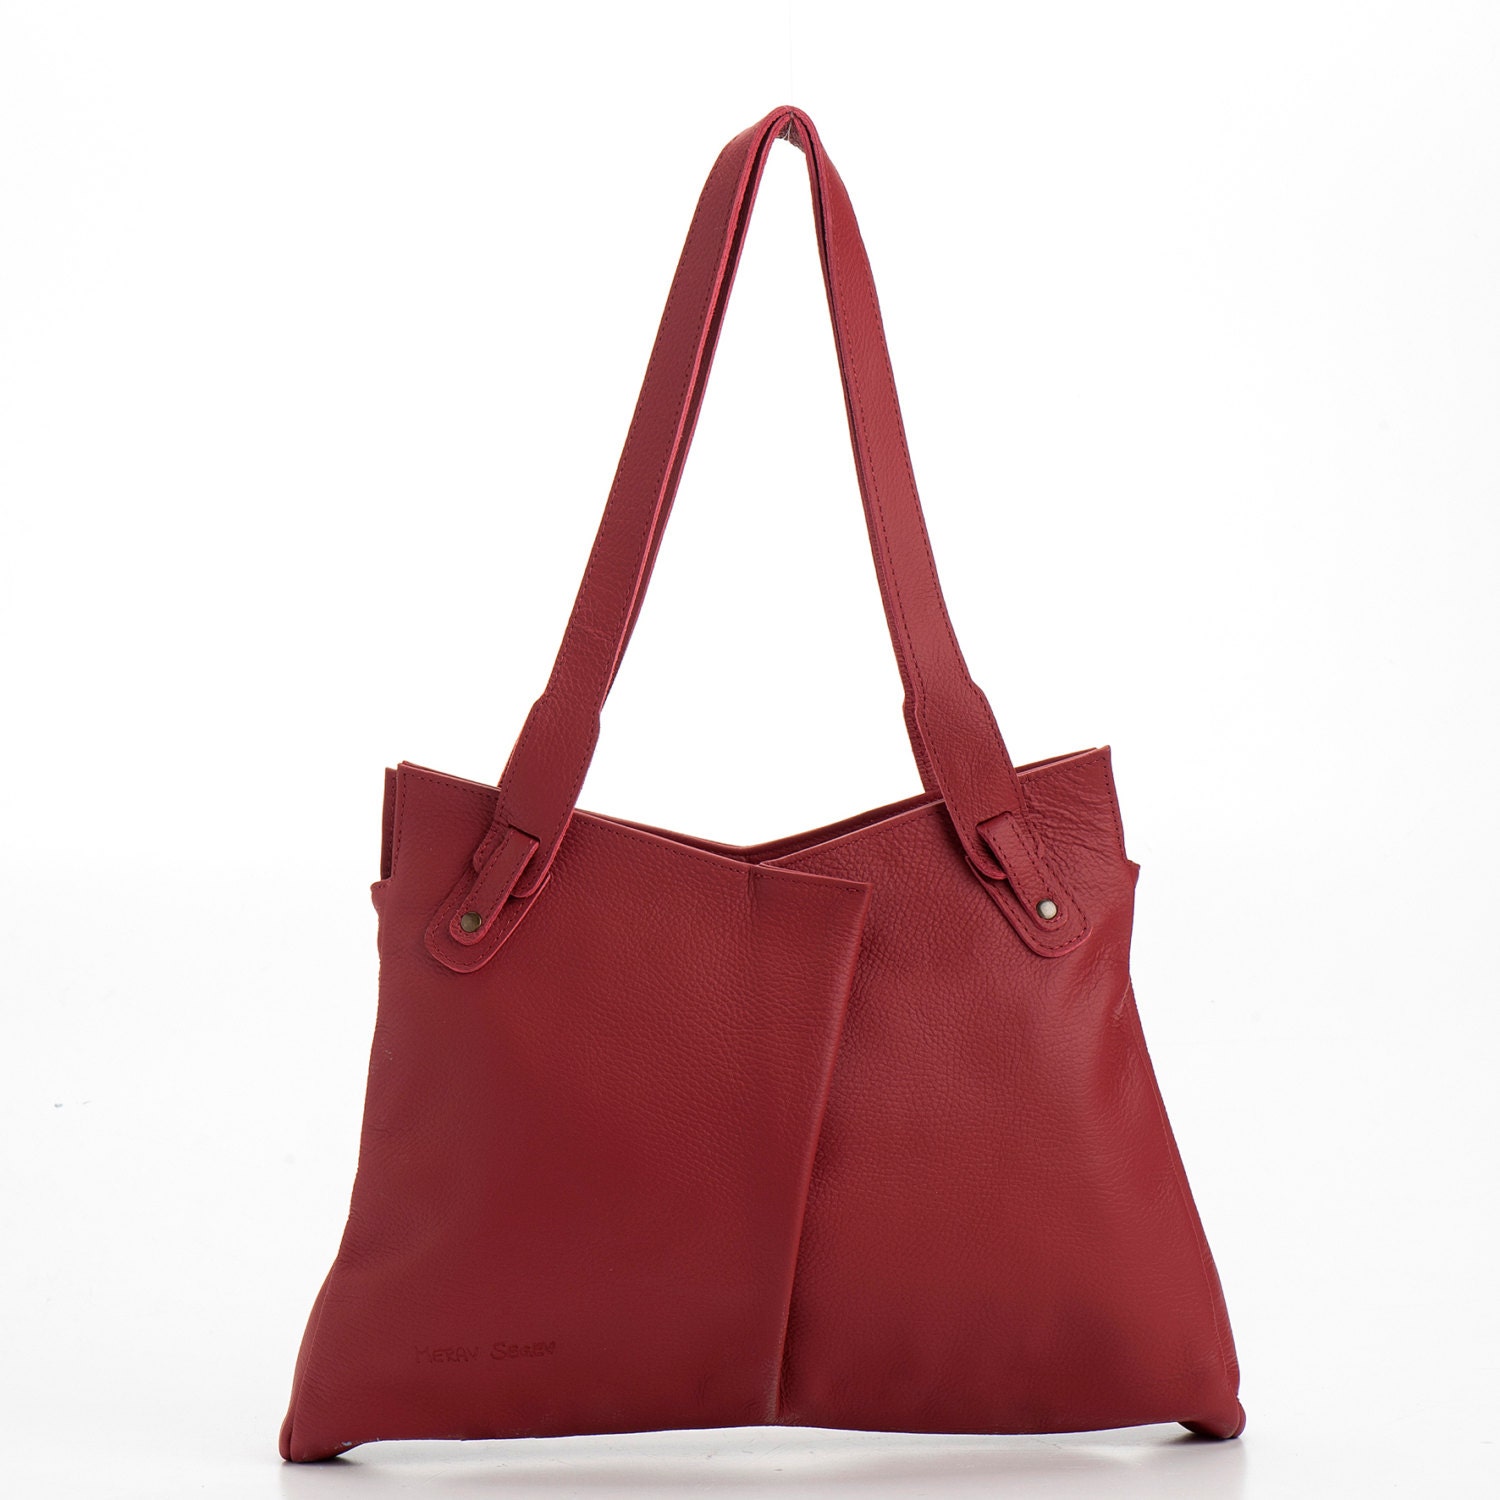 Clearance Sale Red leather tote bag with zipper by MeravSegevBags